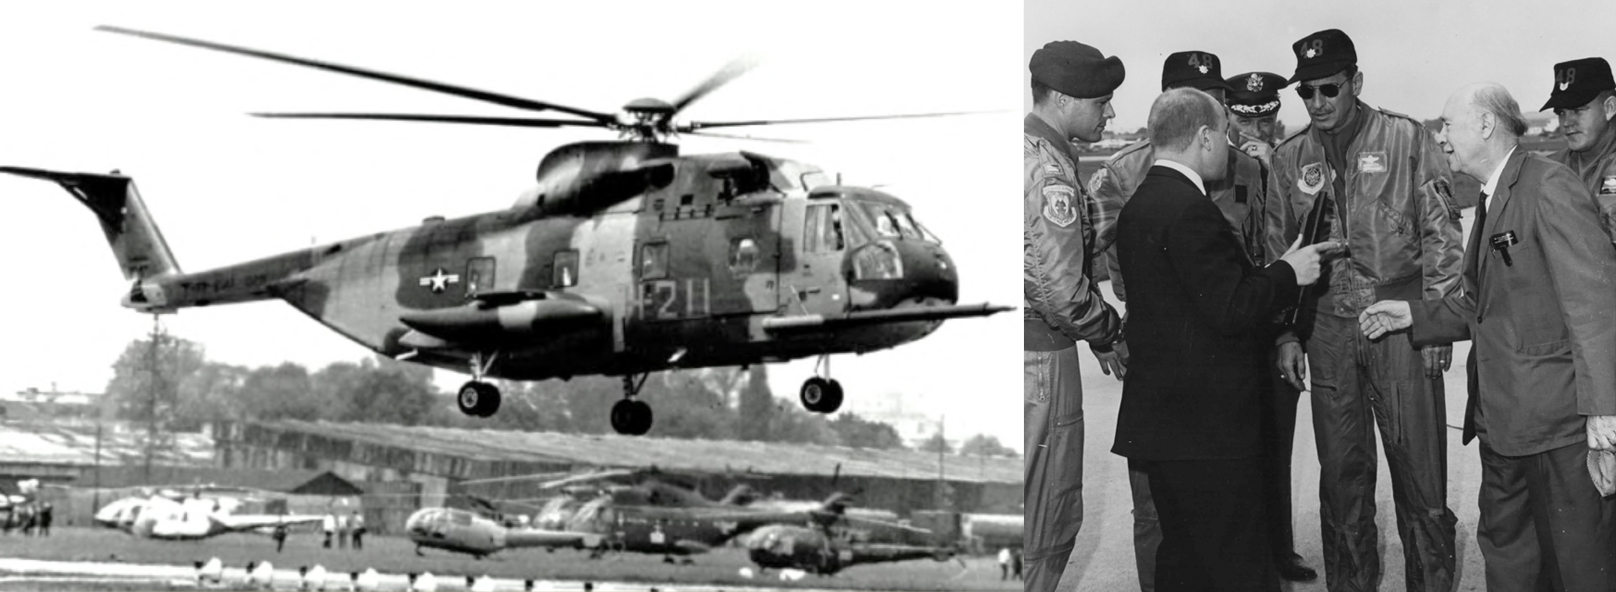 In 1967, two HH-3E helicopters made the first non-stop helicopter flight across the Atlantic Ocean from New York to the 27th Paris Air Show. Igor Sikorsky (right) and his son, Sergei, welcomed the U.S. Air Force crew. Images courtesy Sikorsky Archives.